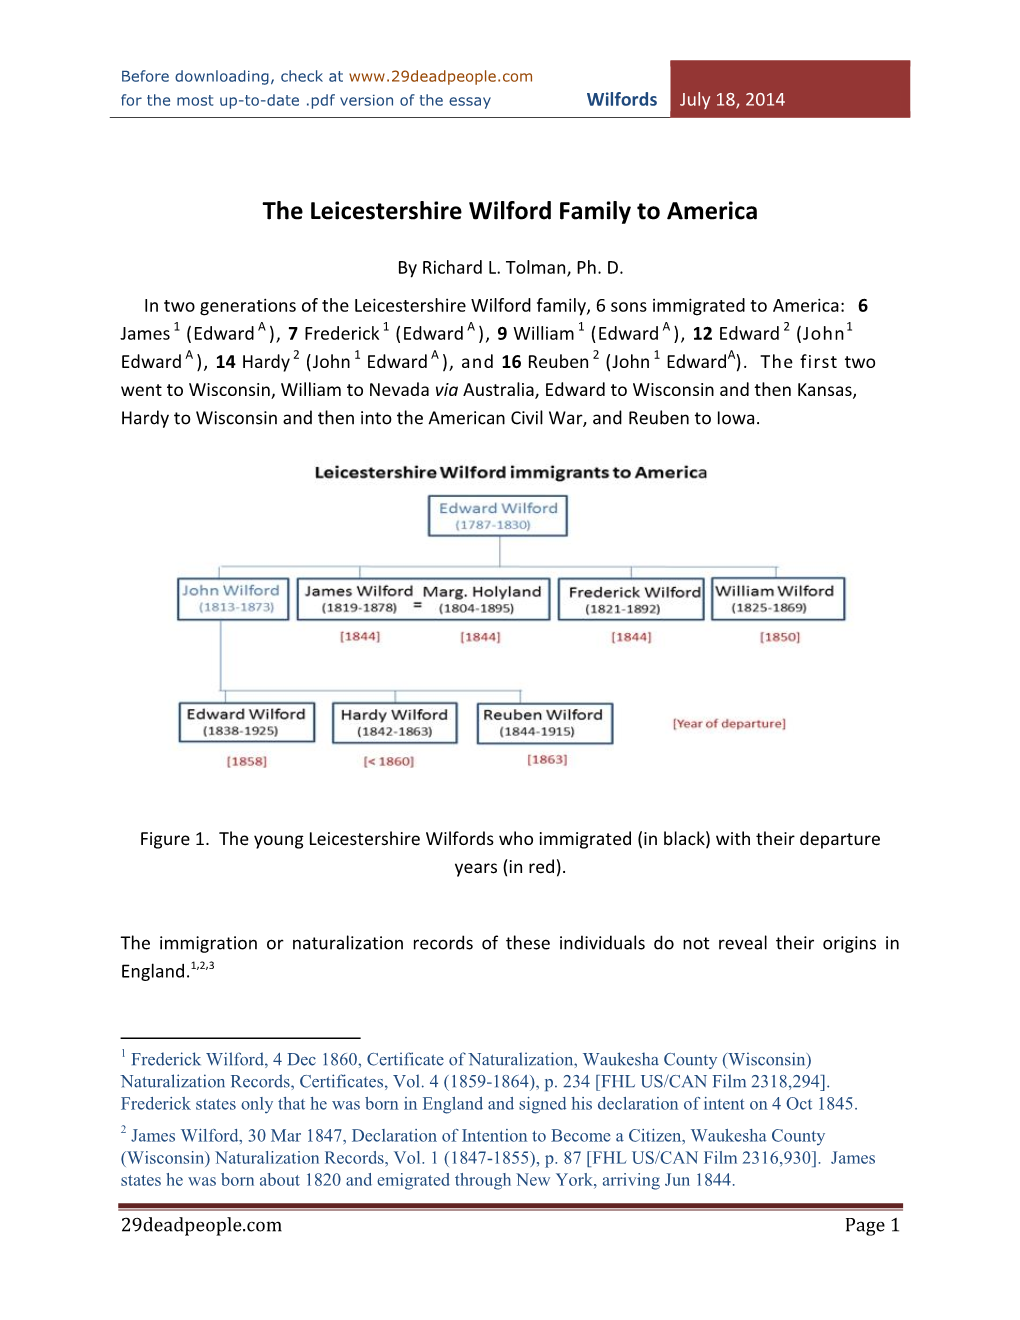 Pdf Version of the Essay Wilfords July 18 , 2014